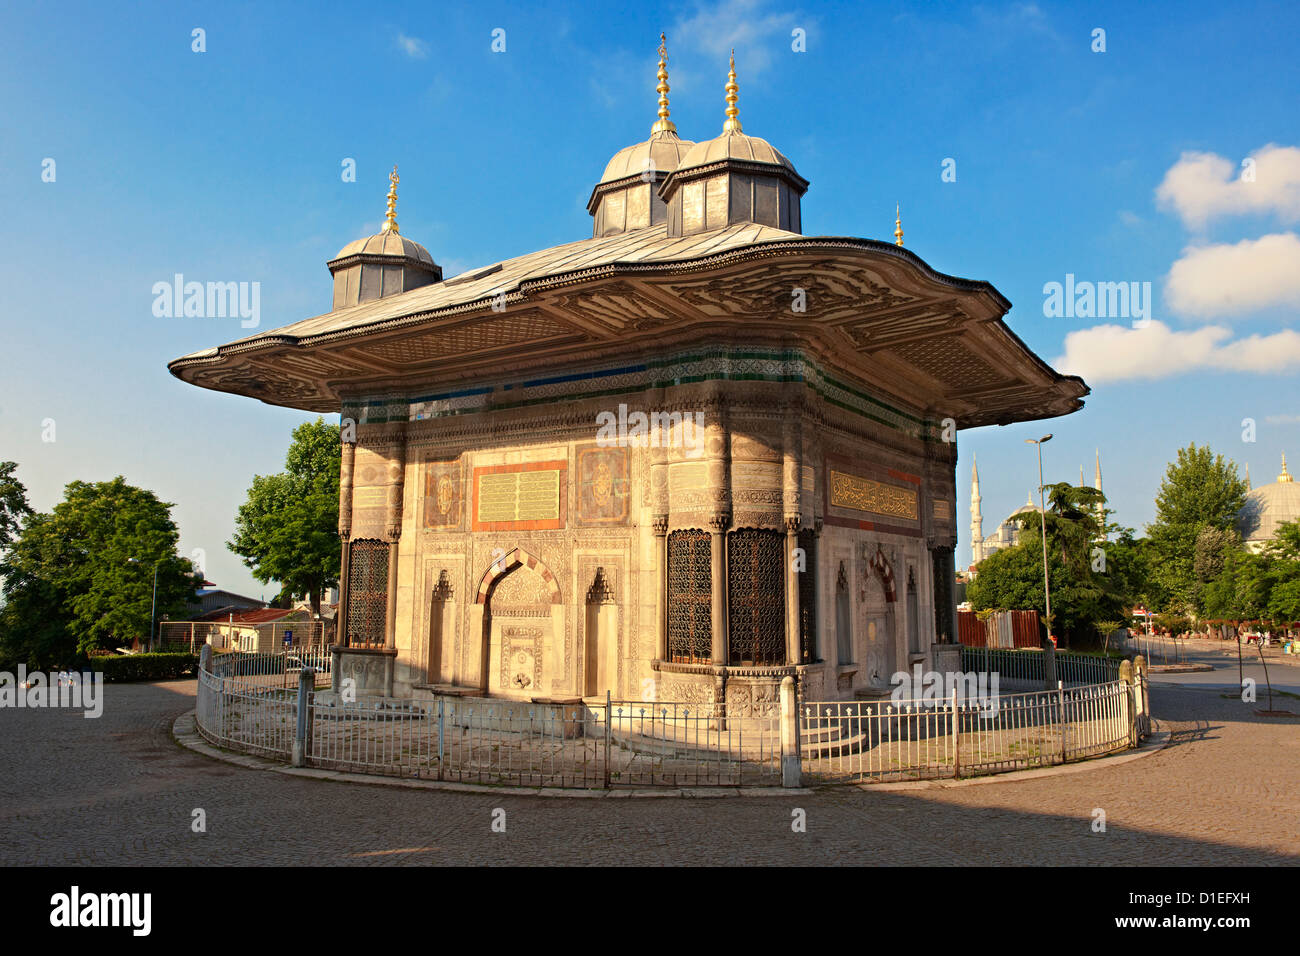 The Fountain of Sultan Ahmed III in the square in front of the Imperial Gate of Topkap Palace in Istanbul, Turkey. Stock Photo